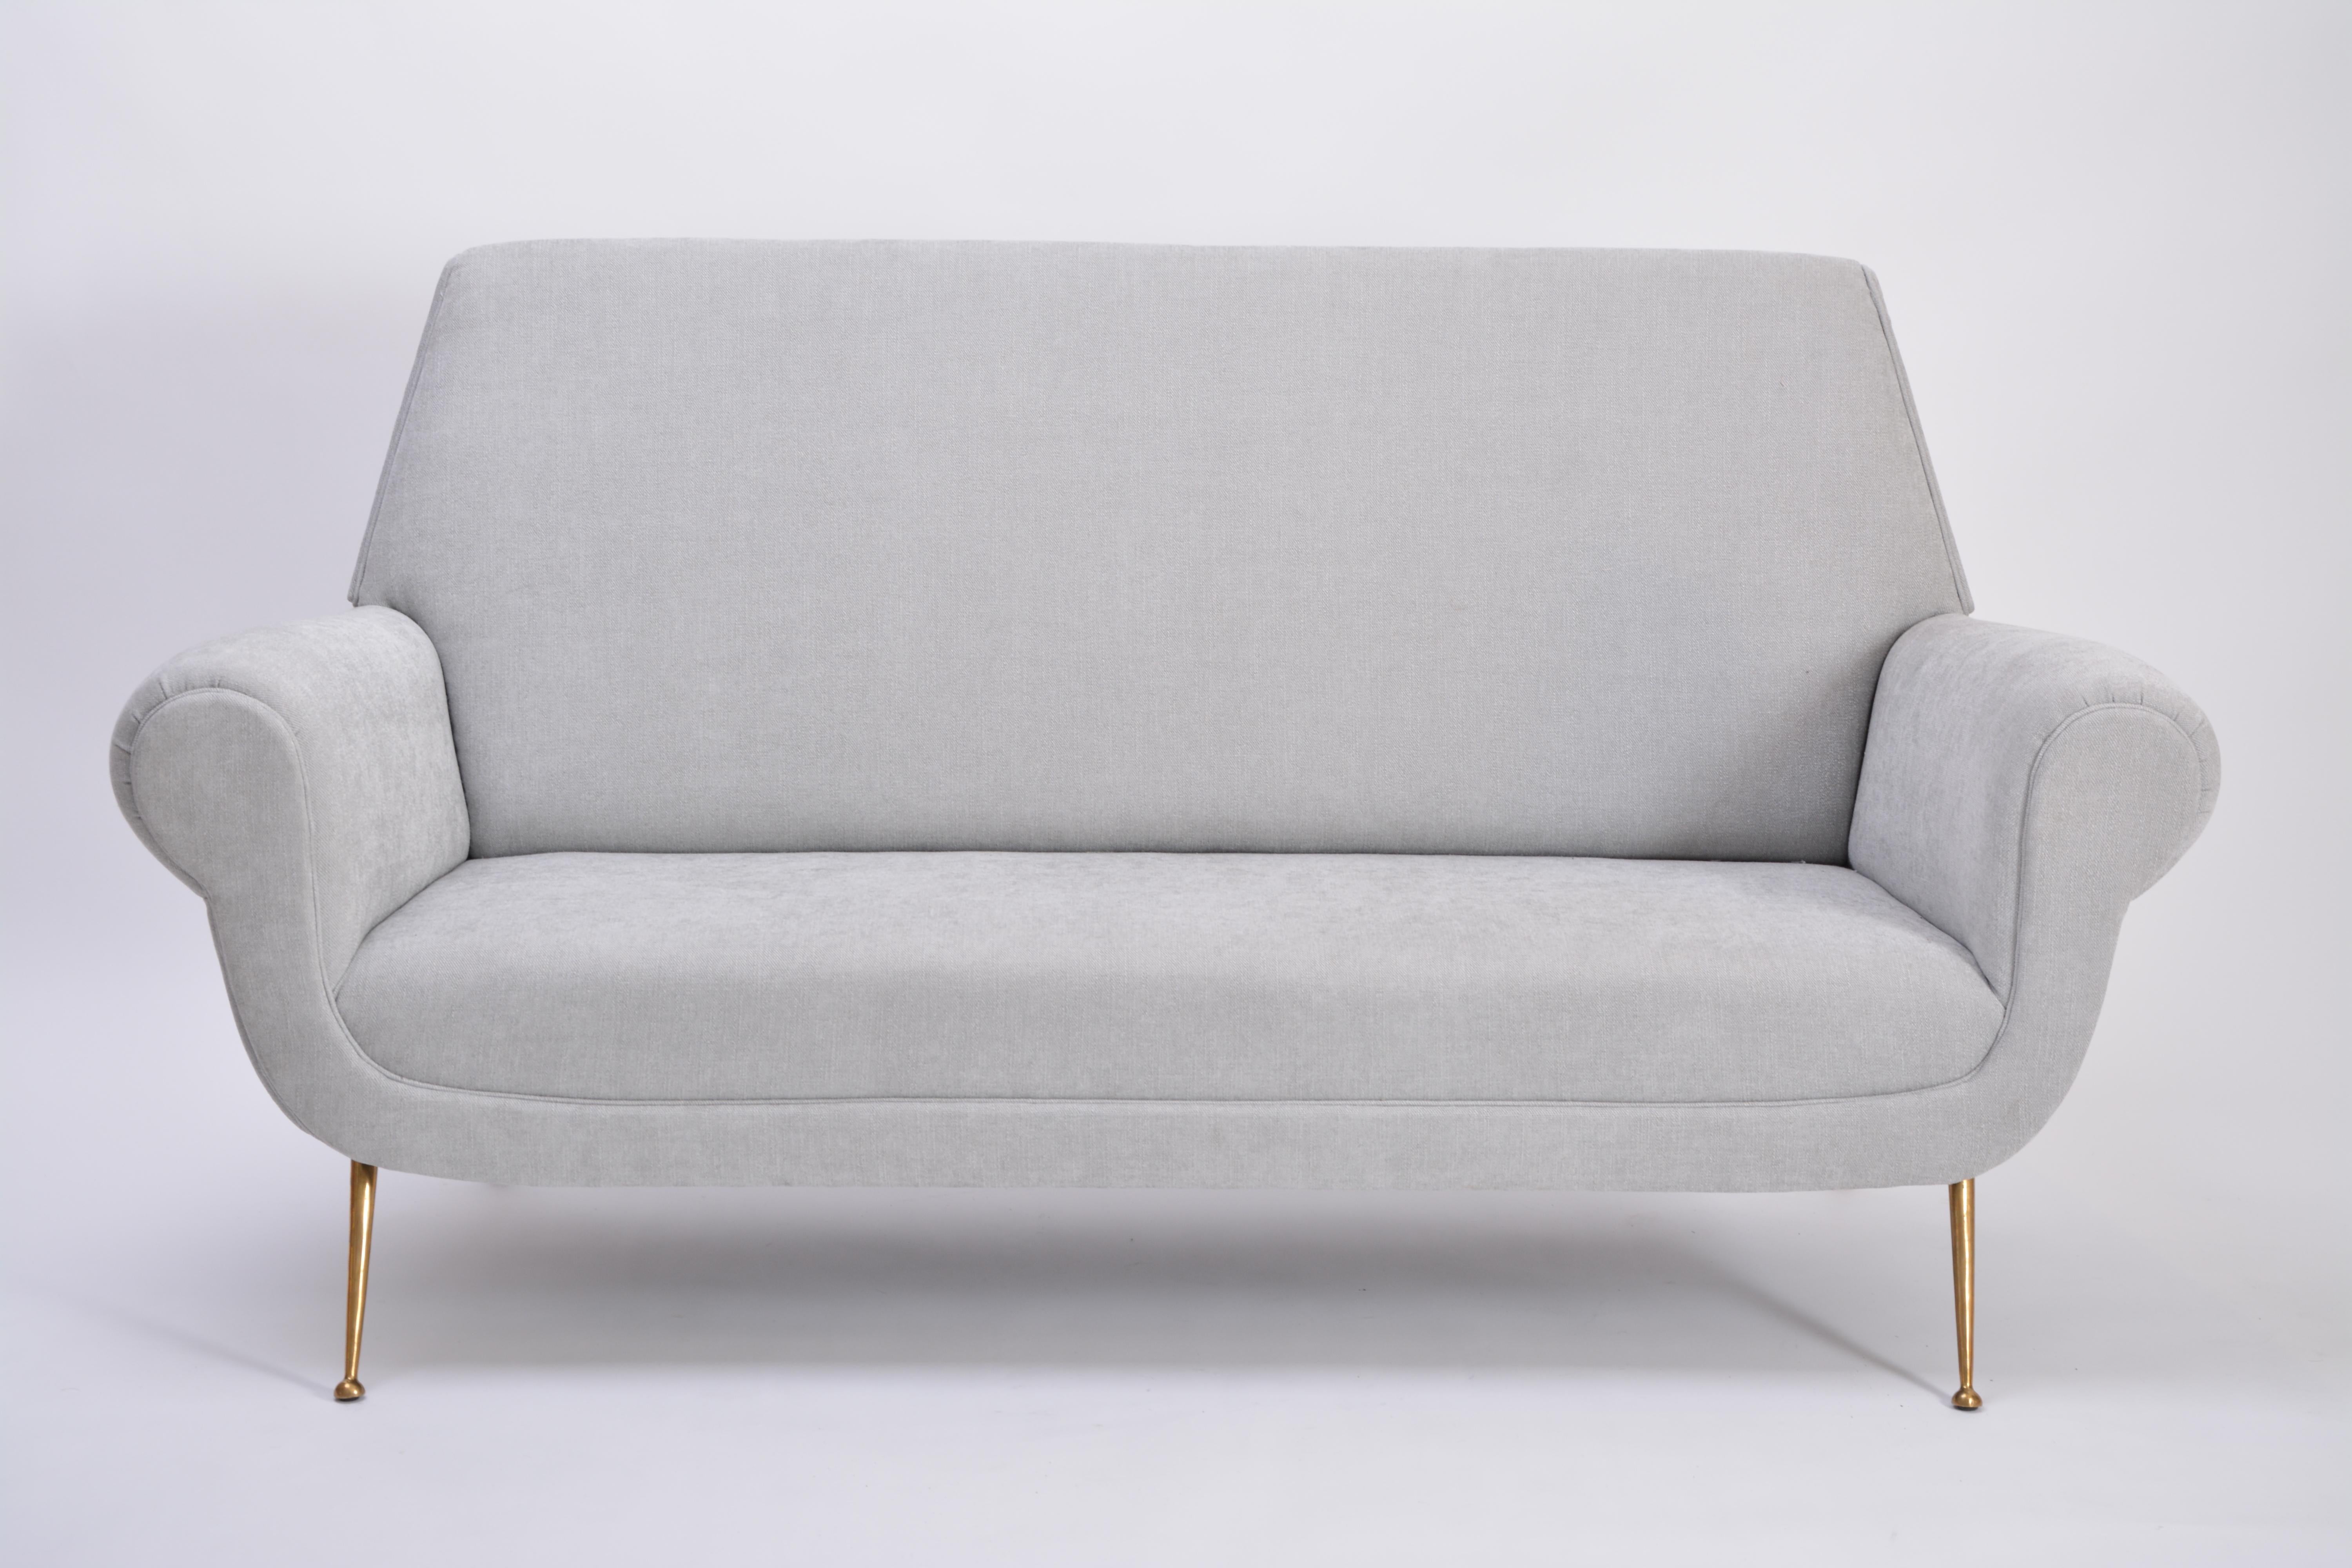 This sofa was designed by Gigi Radice for Minotti in the 1950s. It has been upholstered and features brass legs. It is in excellent vintage condition. 